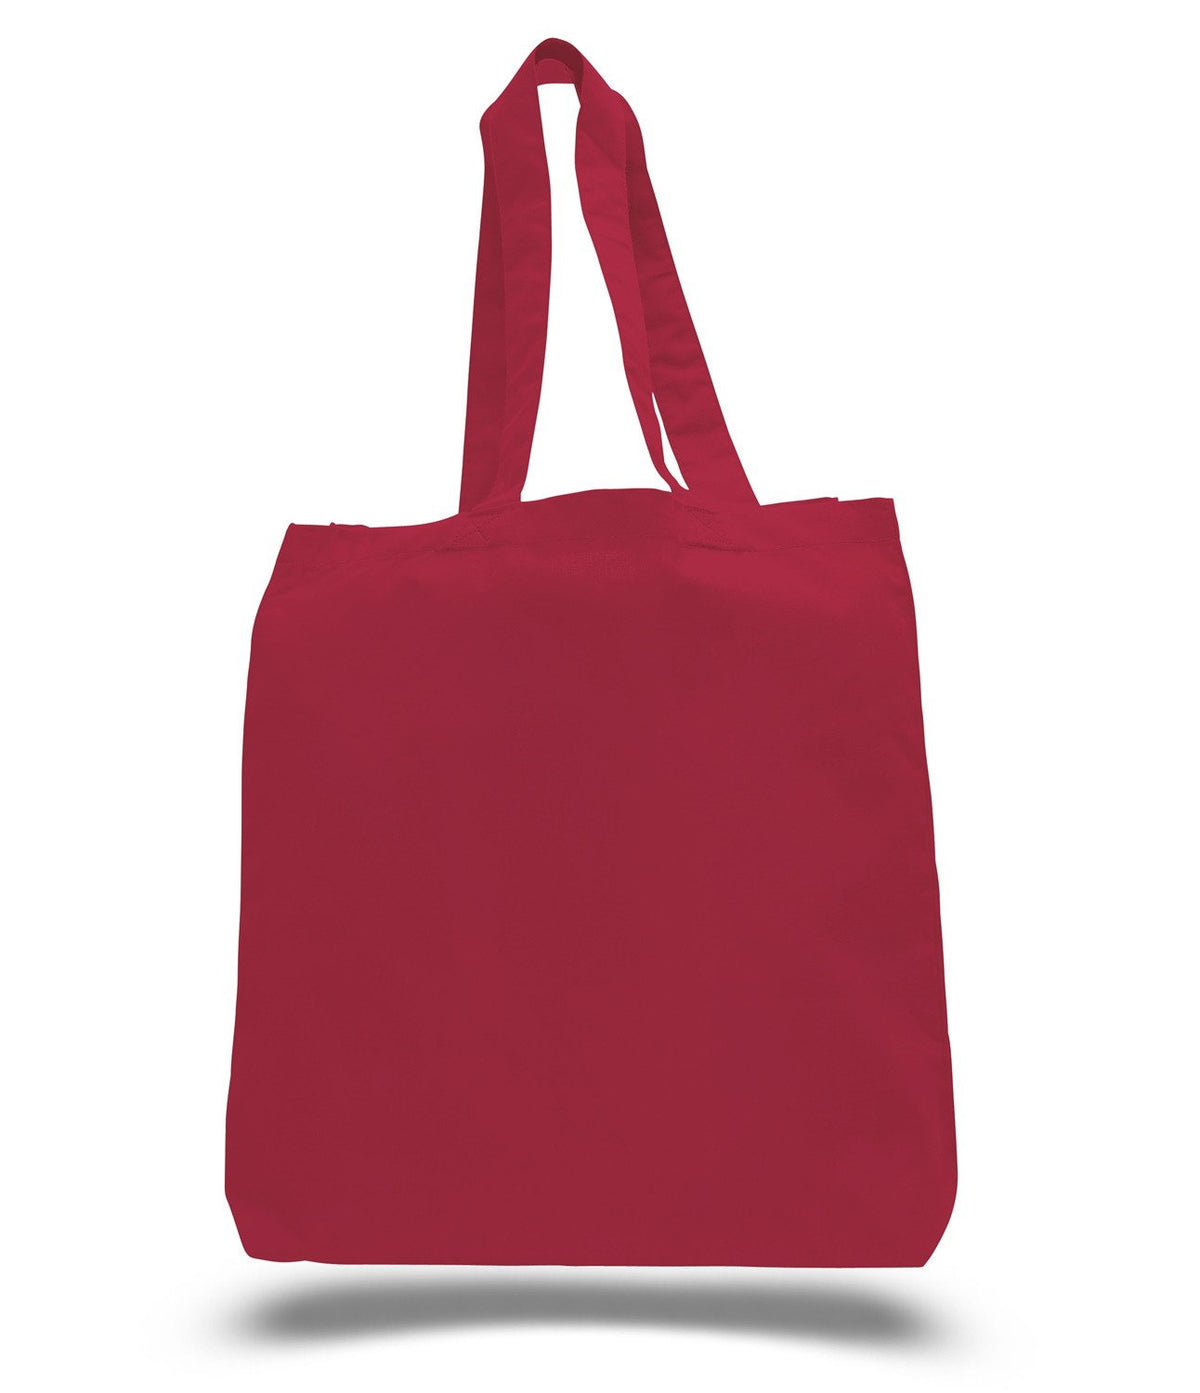 Get Your Reusable Grocery Shopping Tote Bags at Wholesale Prices